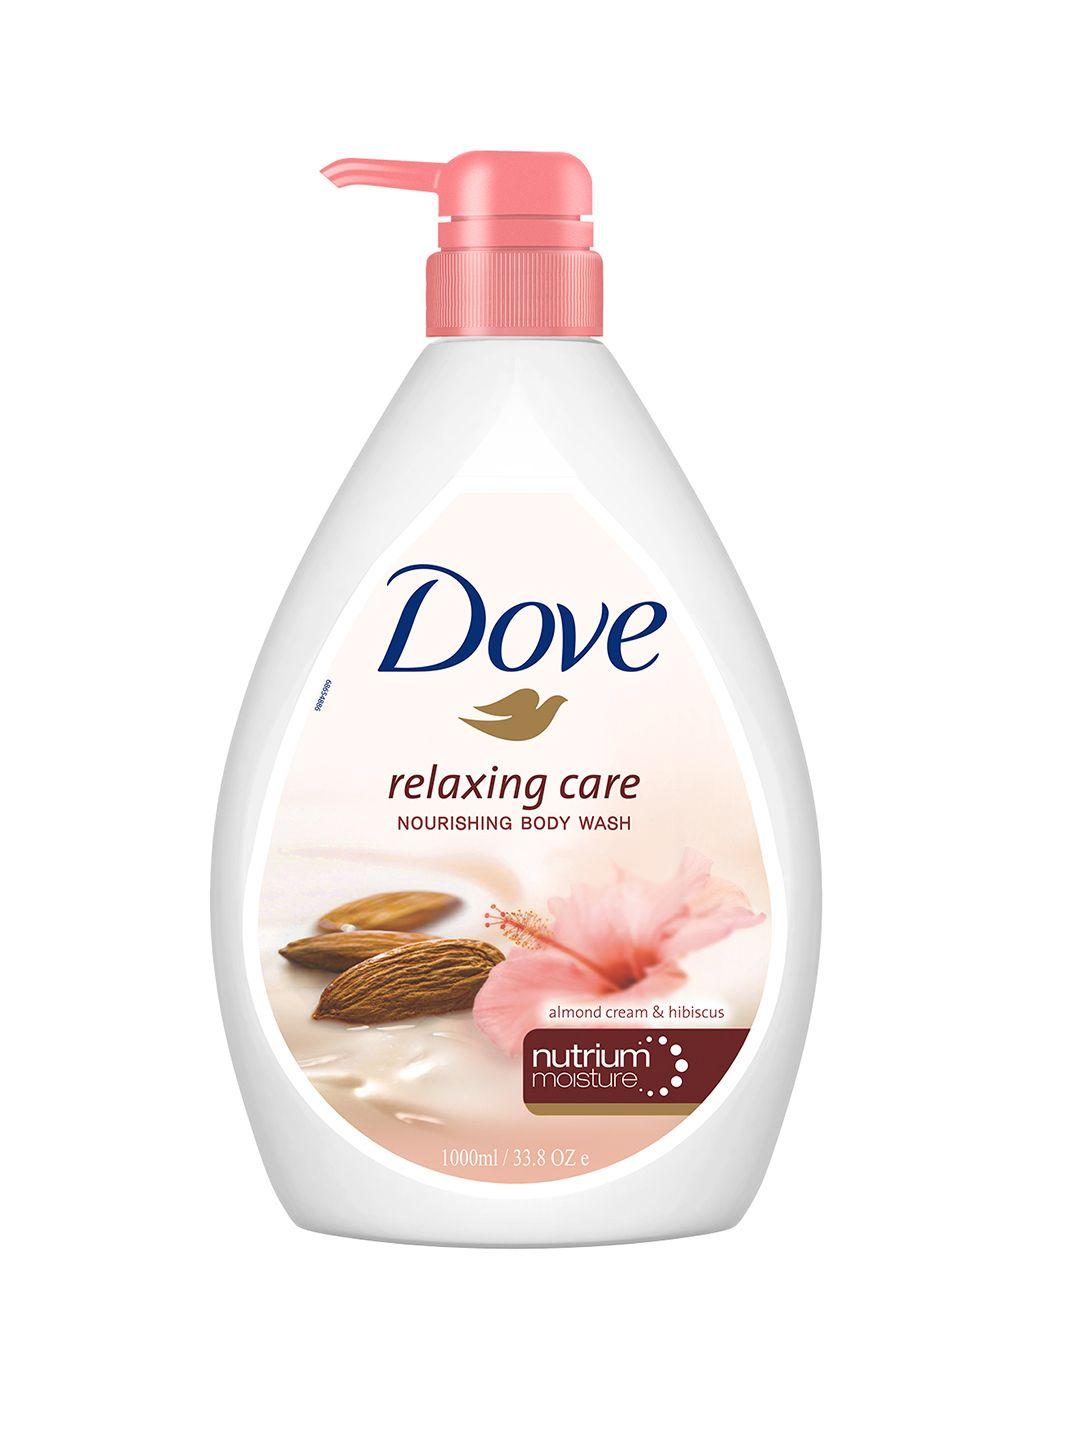 dove-relaxing-care-nourishing-body-wash-with-almond-cream-&-hibiscus---1l